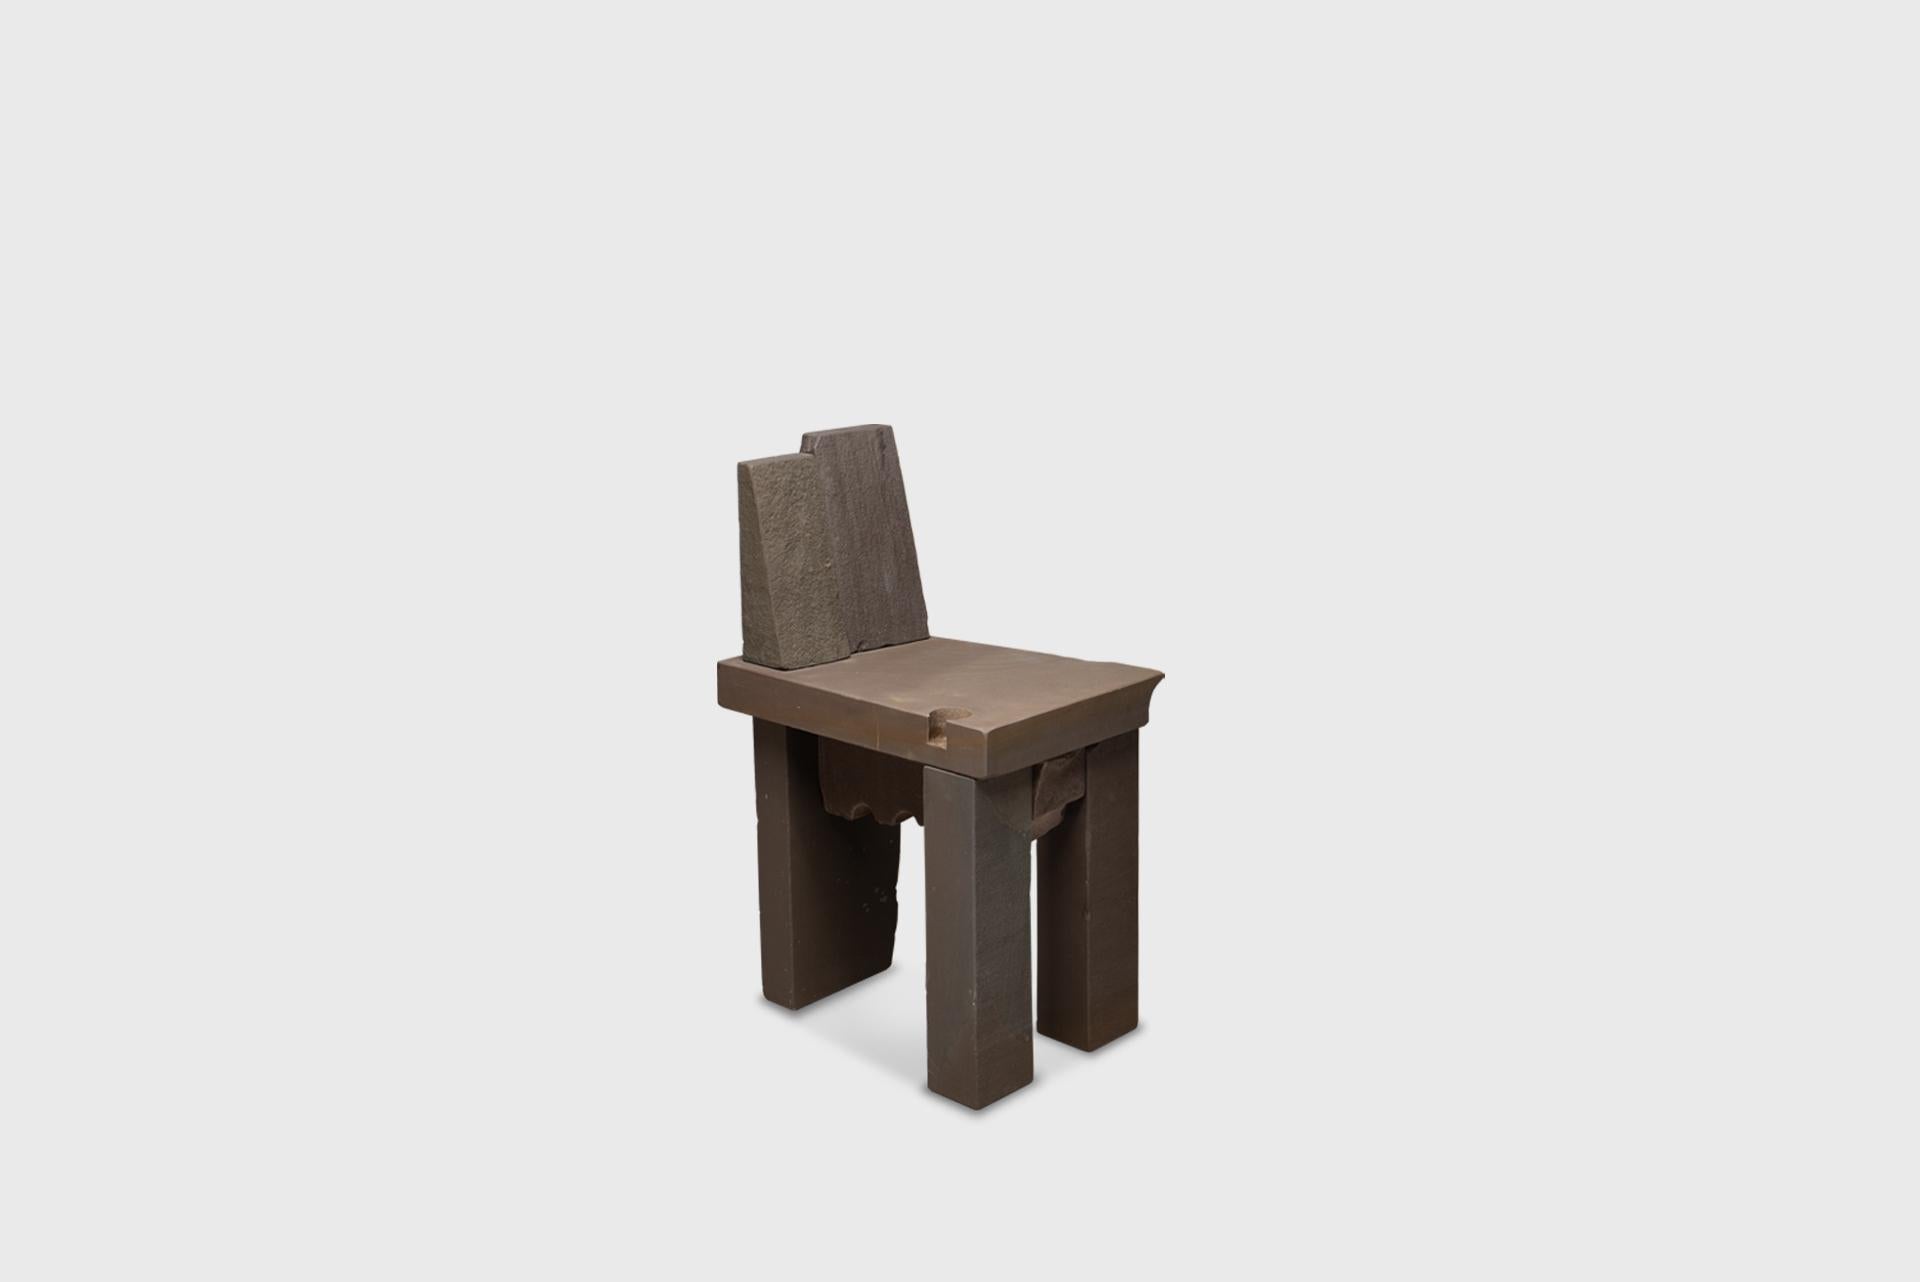 Contemporary Natural Chair 10, Graywacke Offcut Gray Stone, Carsten in der Elst For Sale 4